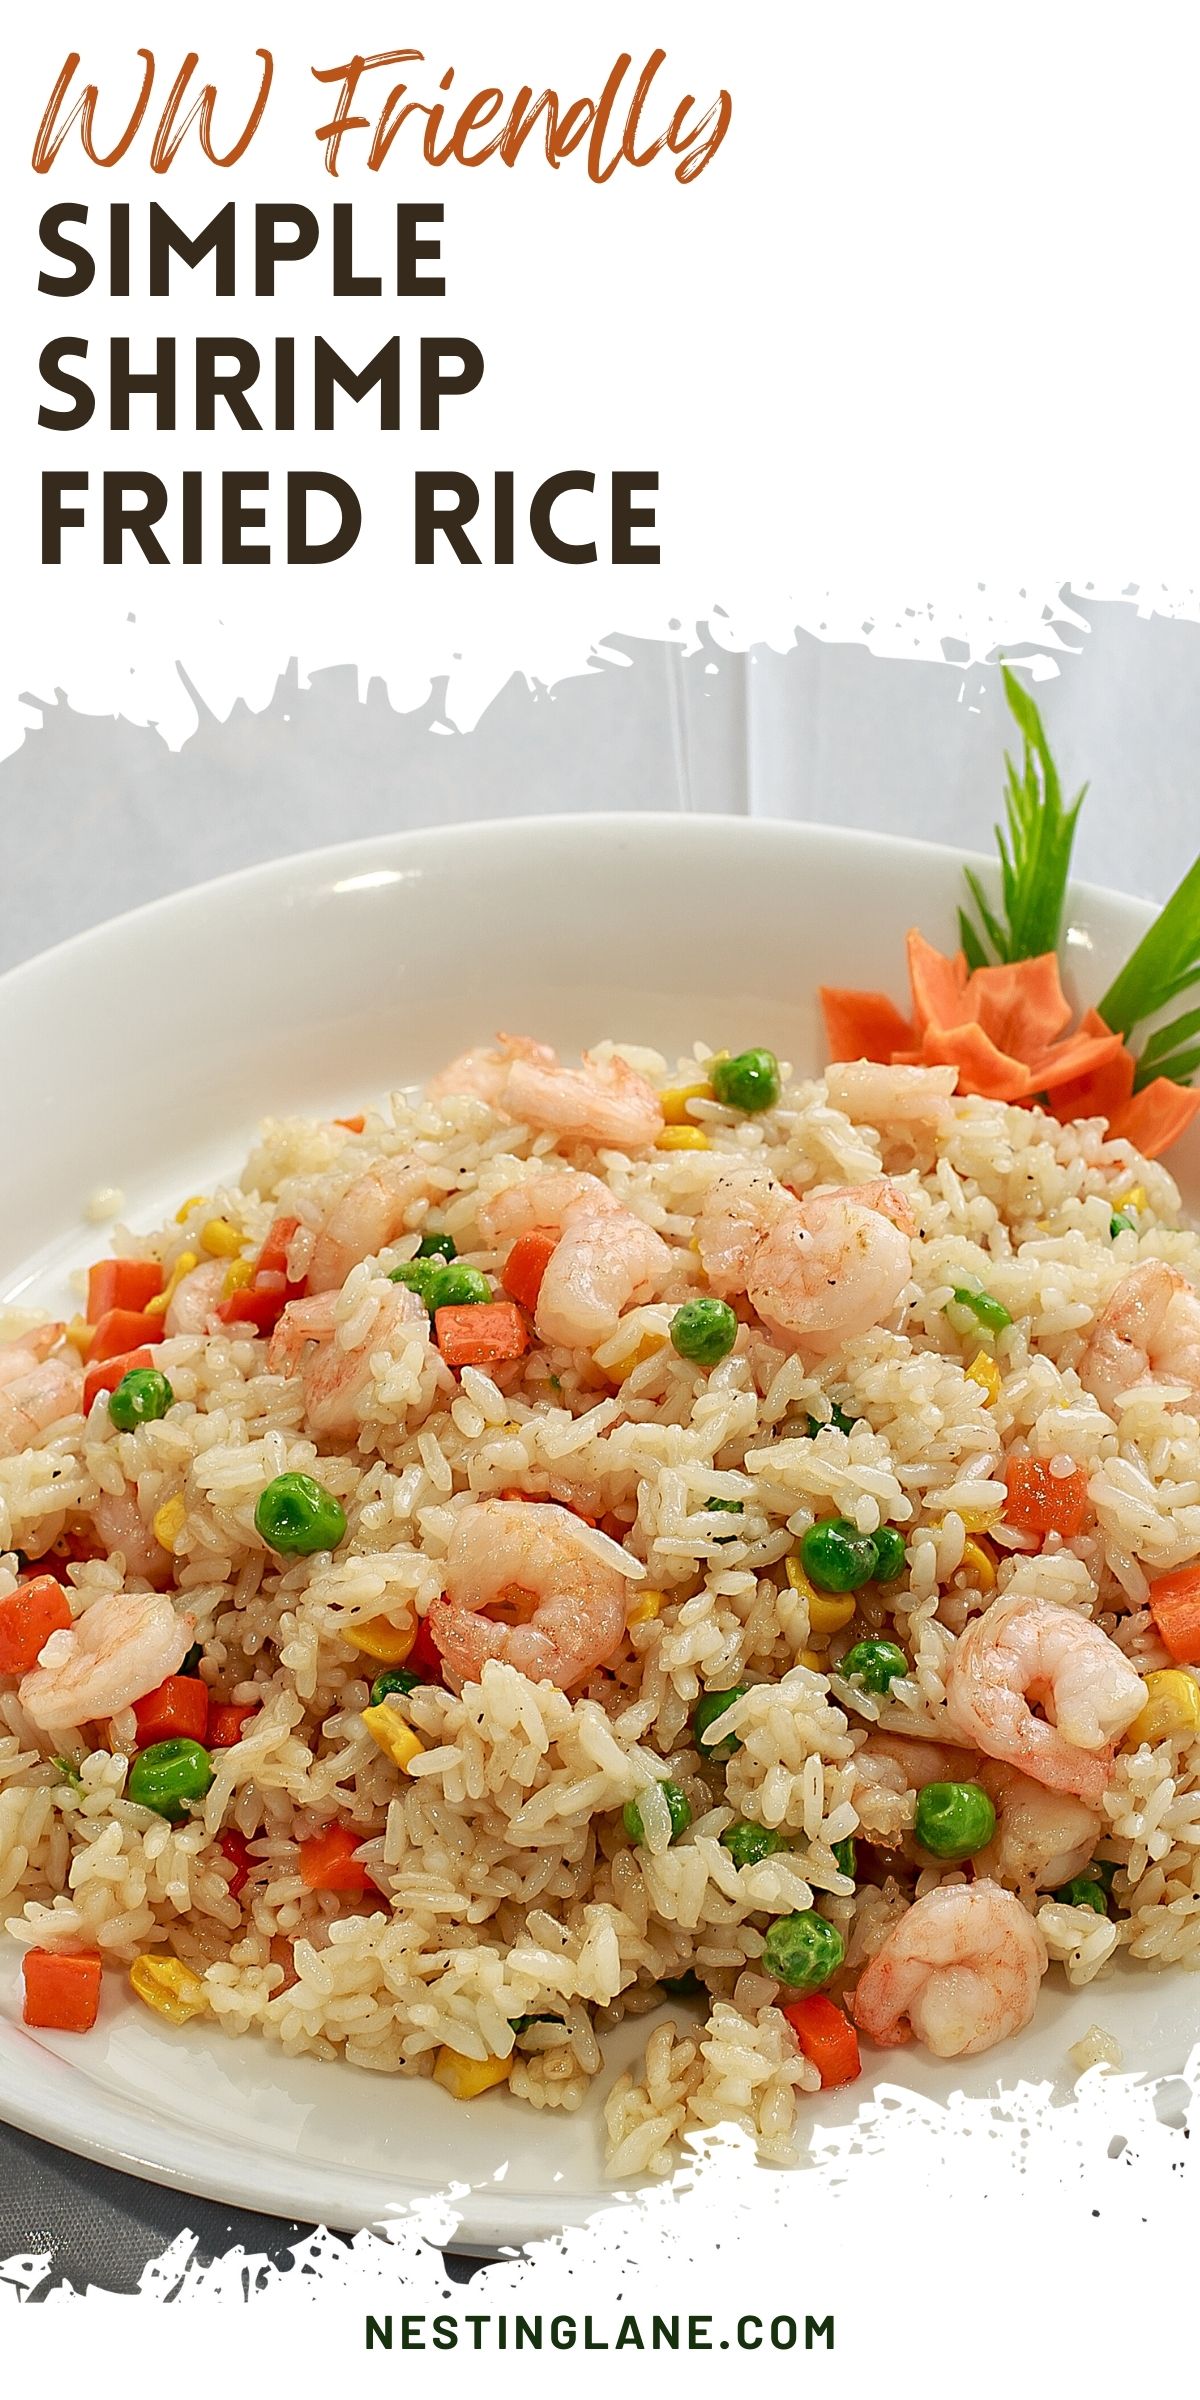 Simple WW Friendly Shrimp Fried Rice Recipe in a white bowl on a white surface.